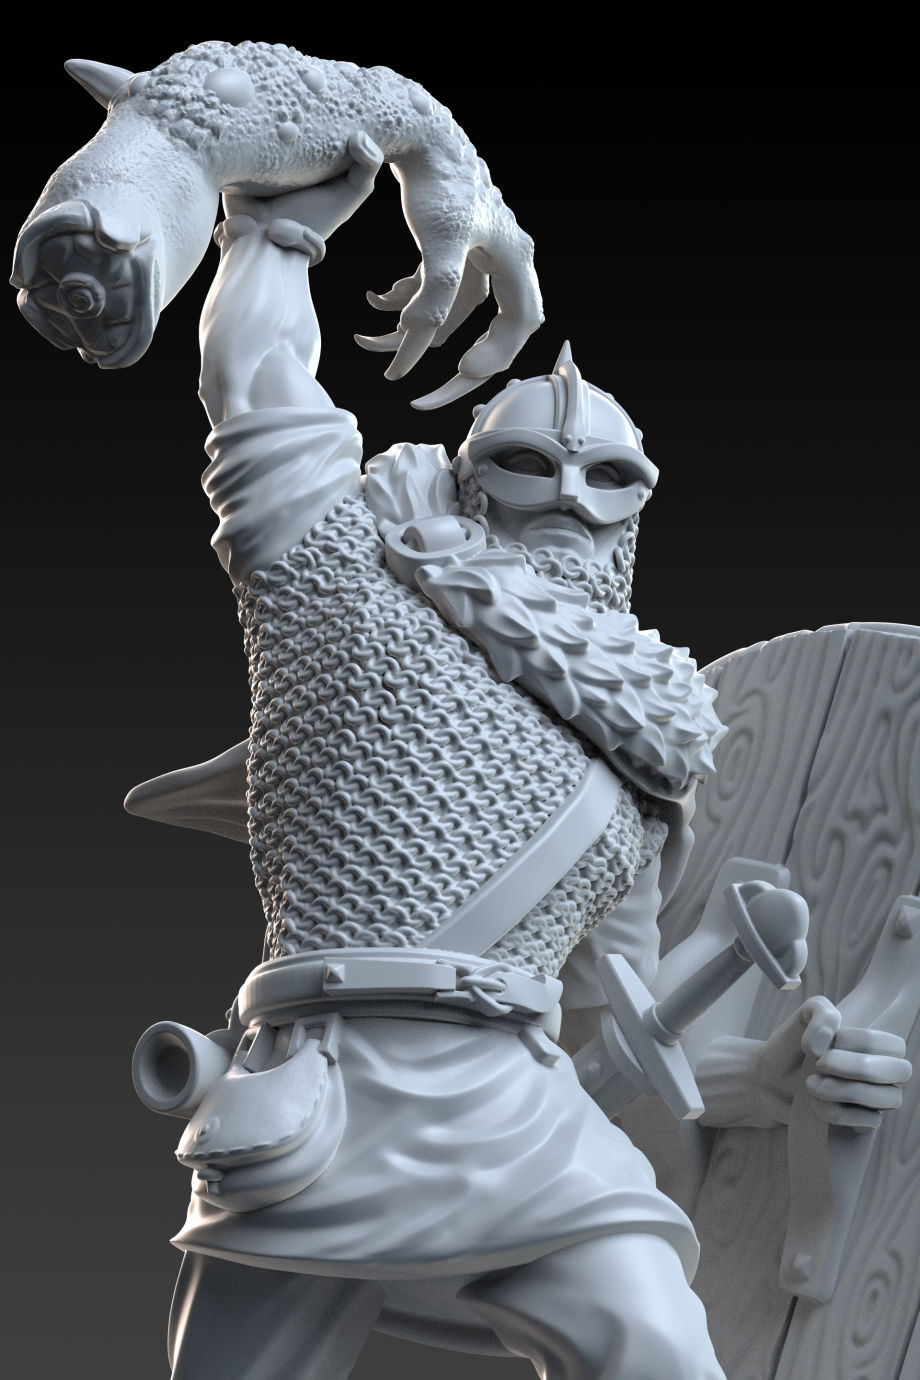 miniatures sculpted with zbrush